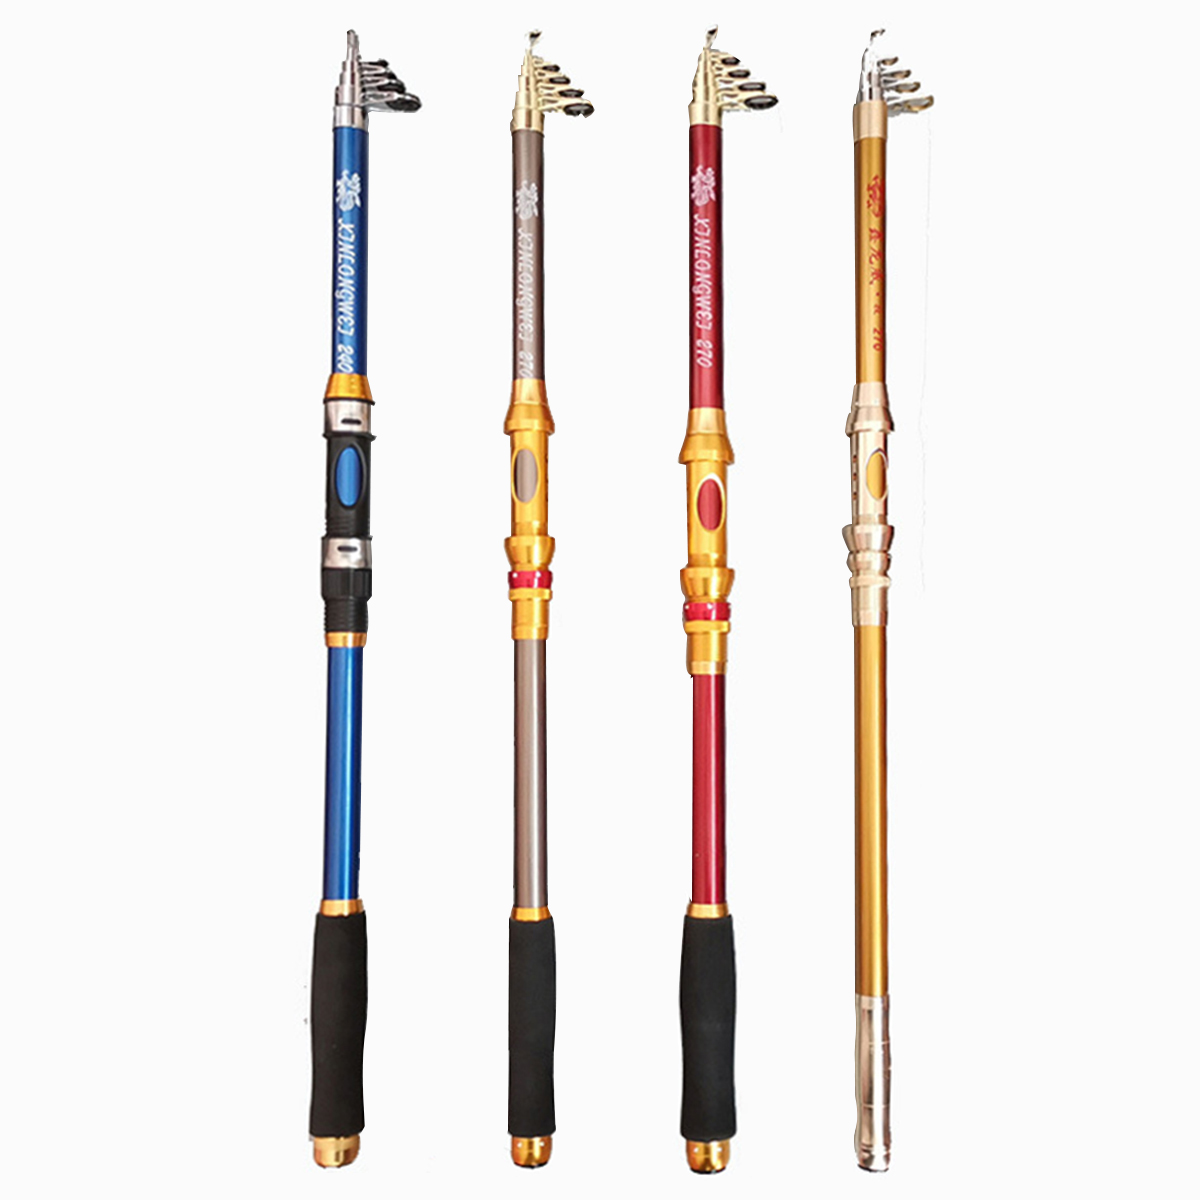 2124273036M-Telescopic-Fishing-Rod-Ultra-light-and-Sturdy-Long-distance-Casting-Rod-Outdoor-Fishing--1889795-5